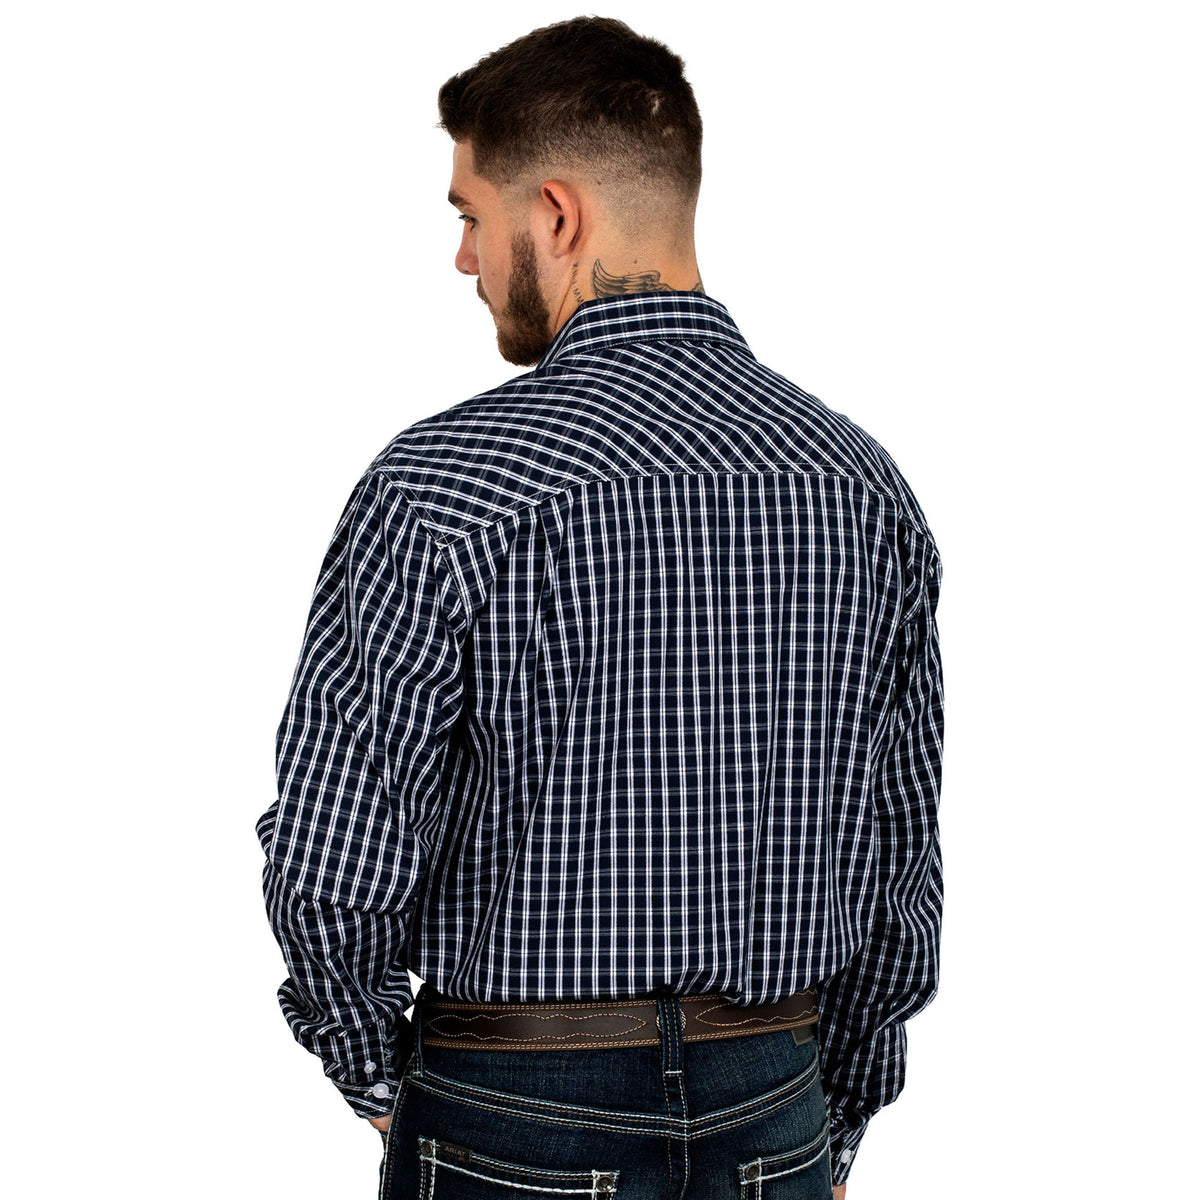 Just Country Mens Austin Full Button Check Shirt - Navy/White